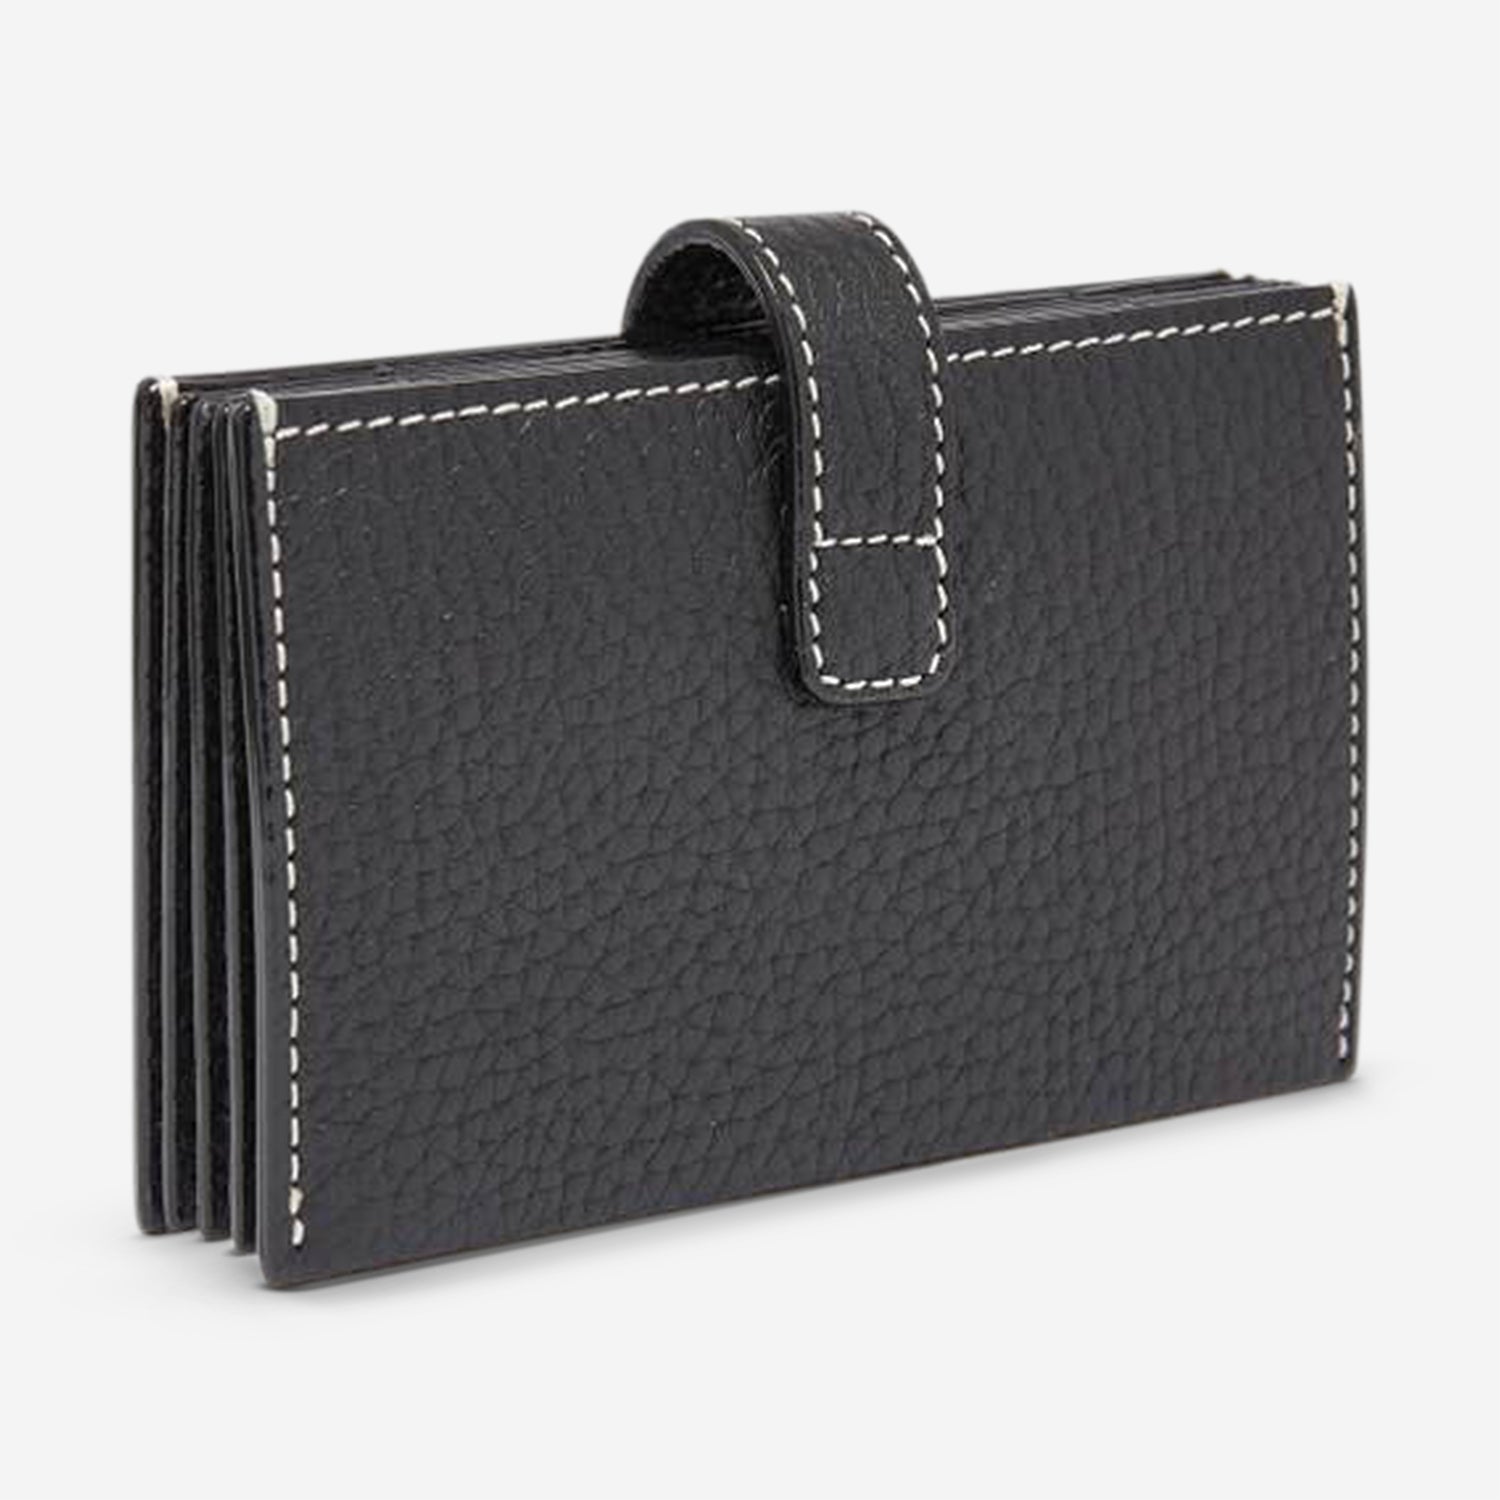 Bally Alil Women's Black Business Card Holder Wallet 6232773 - THE SOLIST - Bally